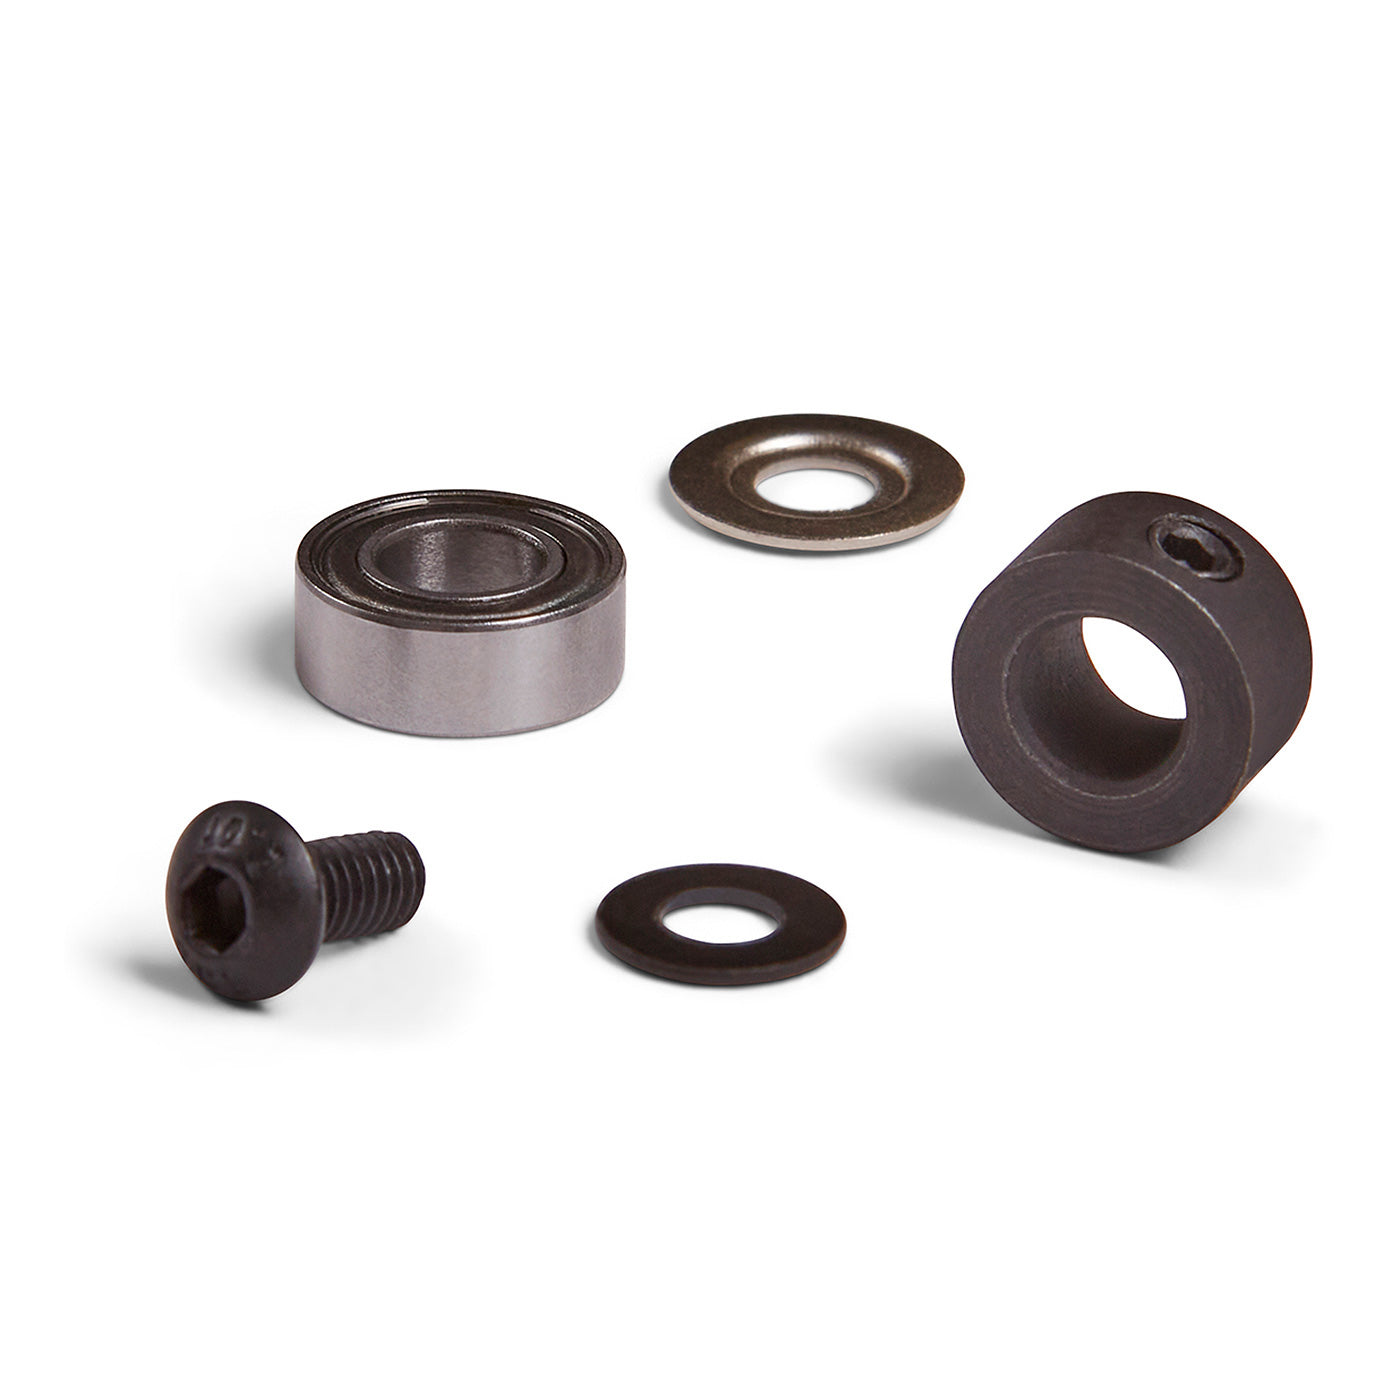 Bearing Kit for R5691, R5817, R5818, R5819 and R5820  